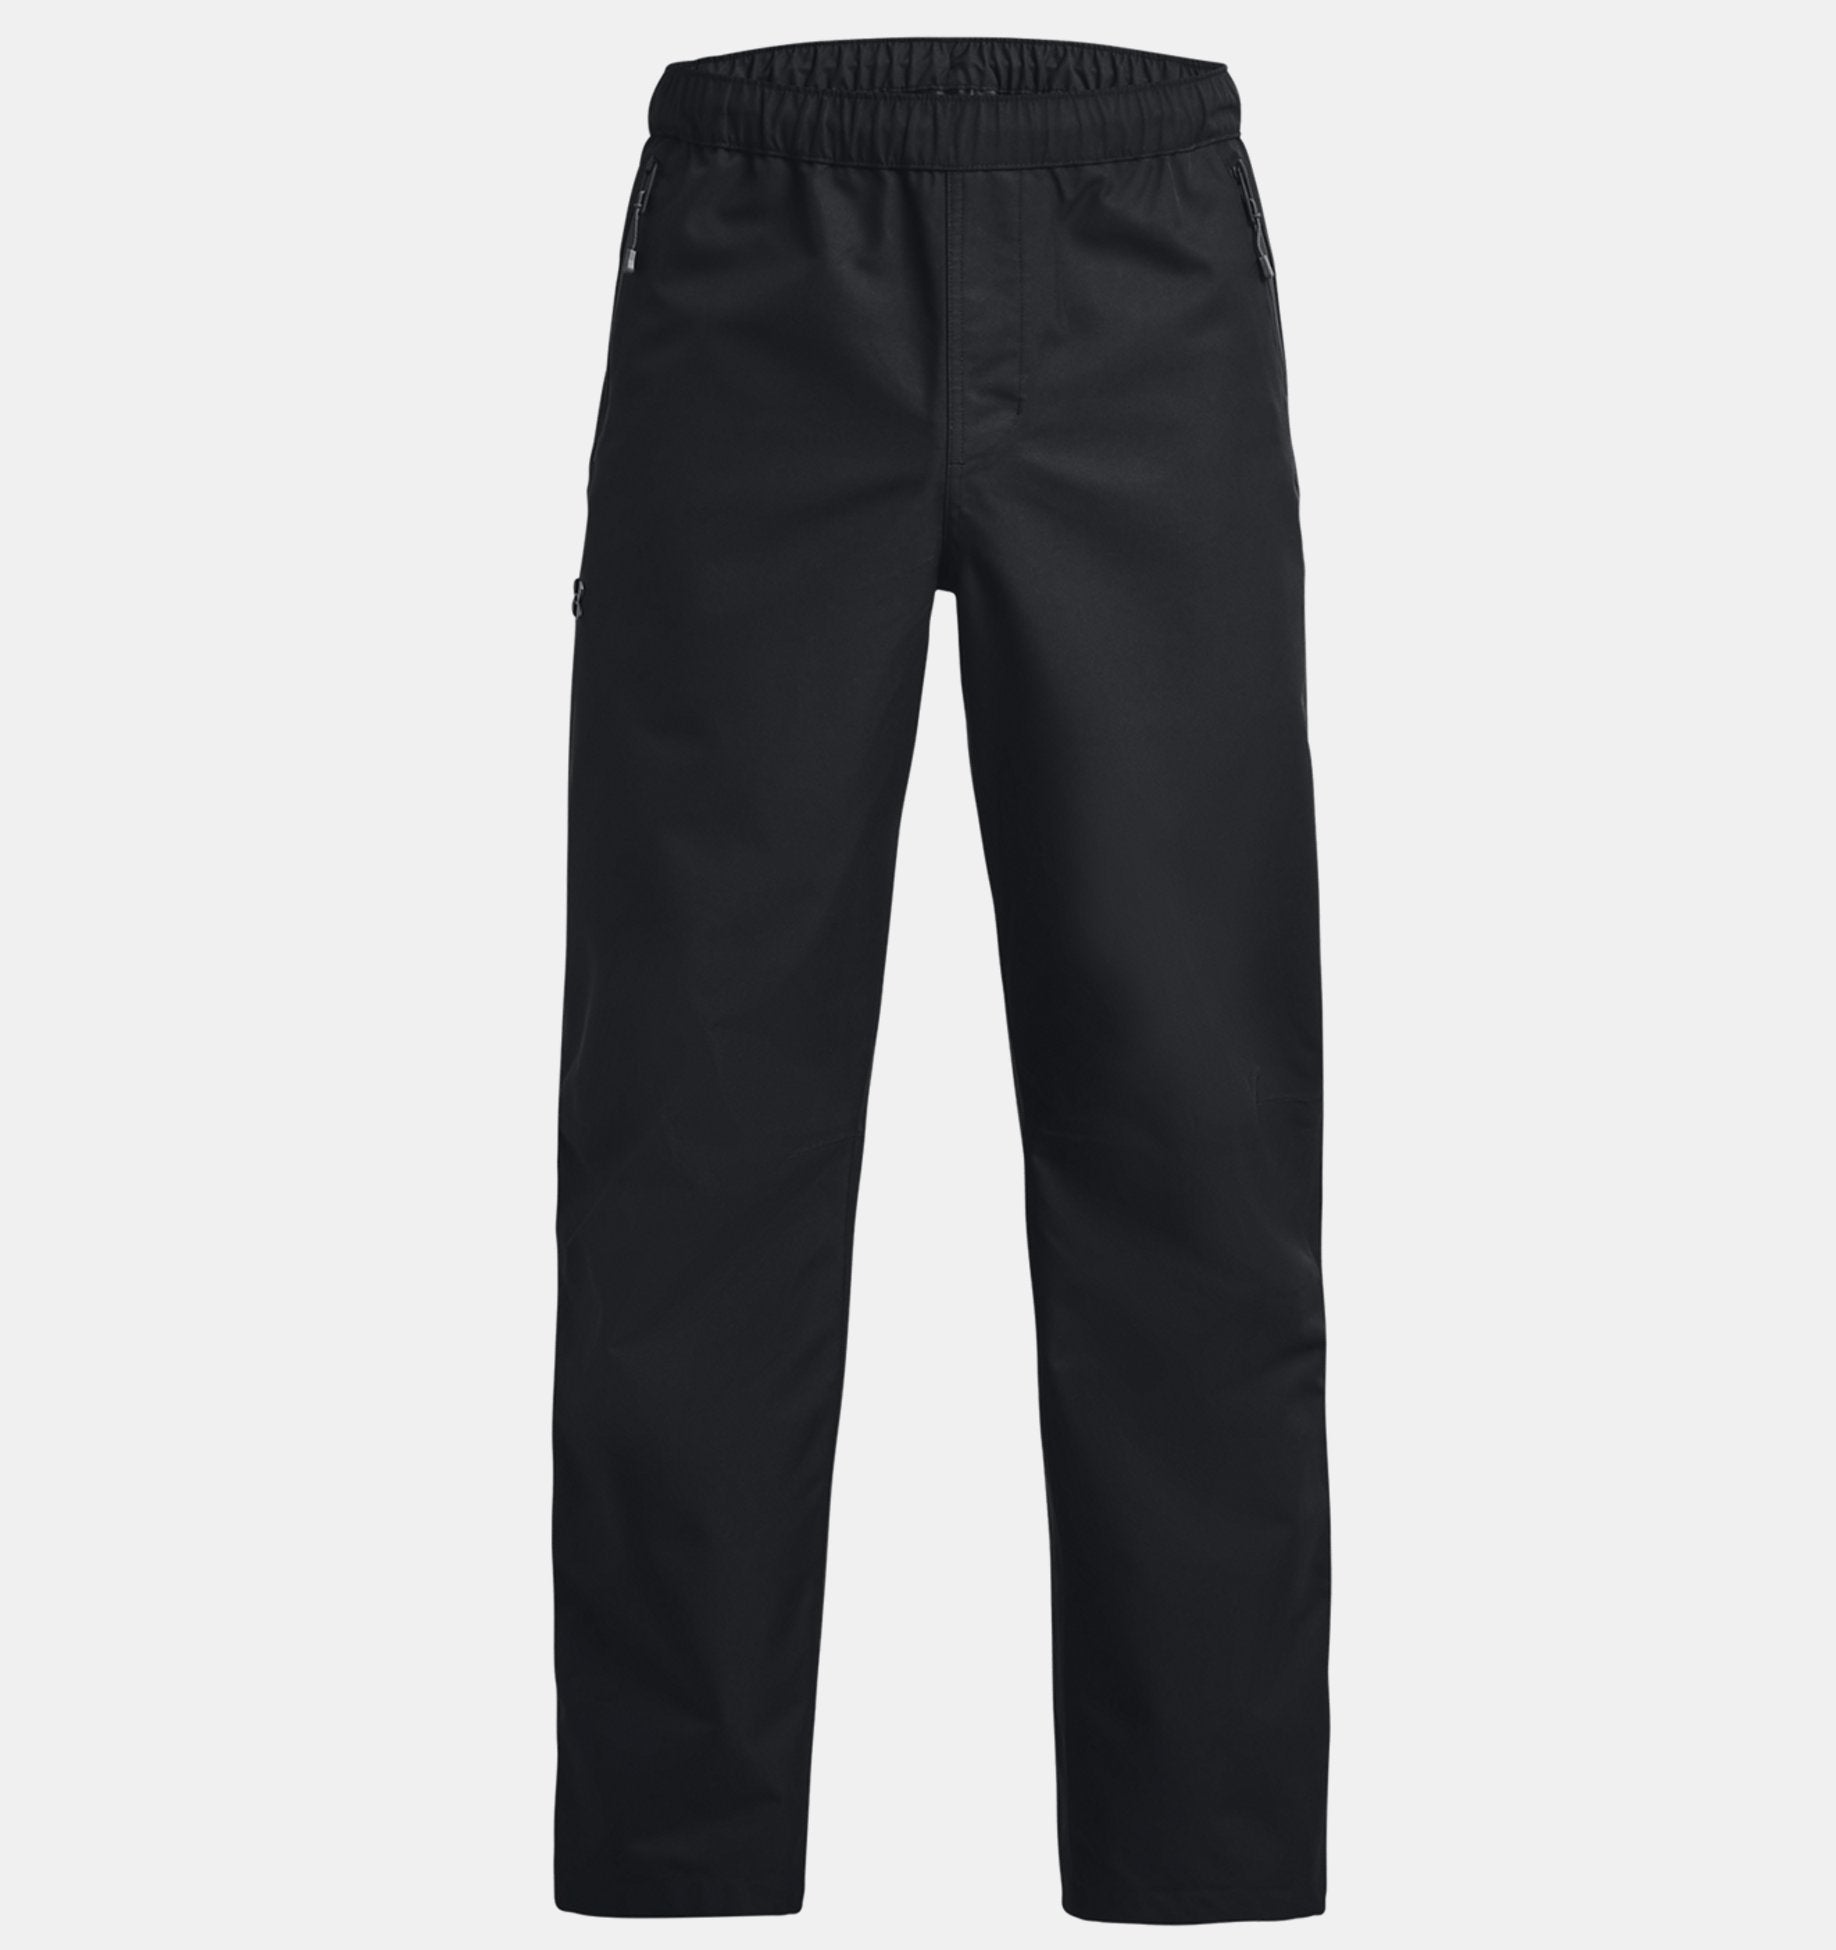 Under Armour Lined Rain Pant